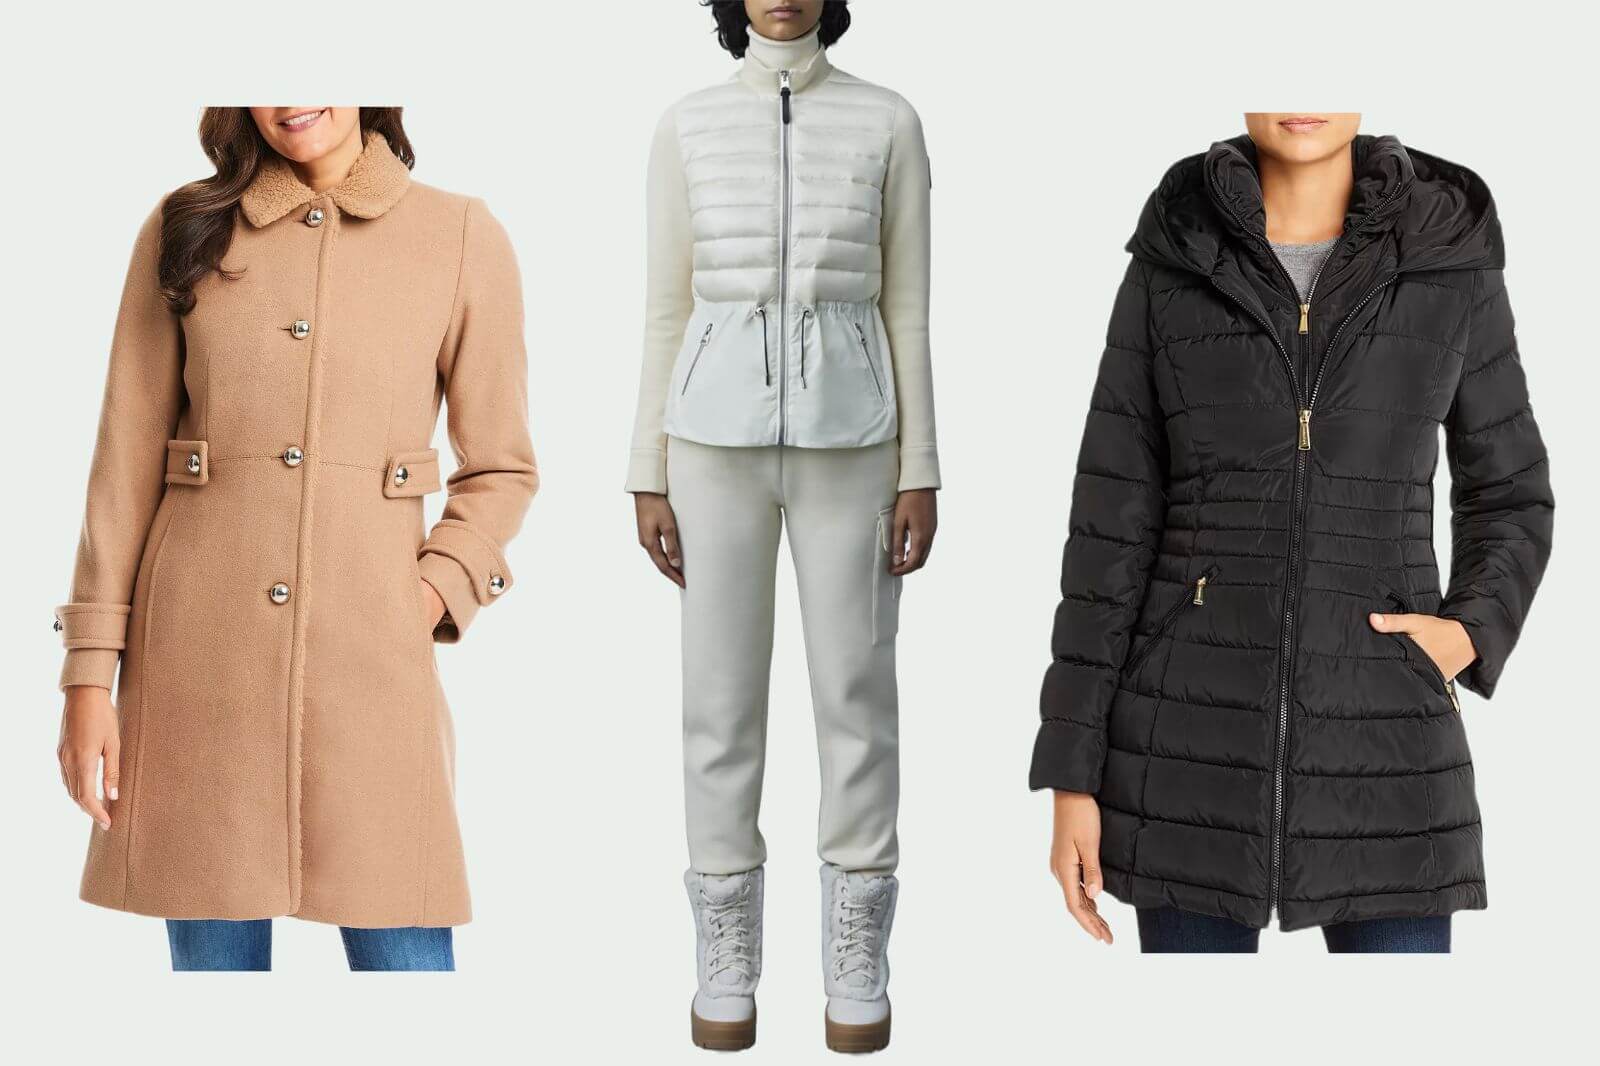 How to Choose the Best Coat for Your Body Type